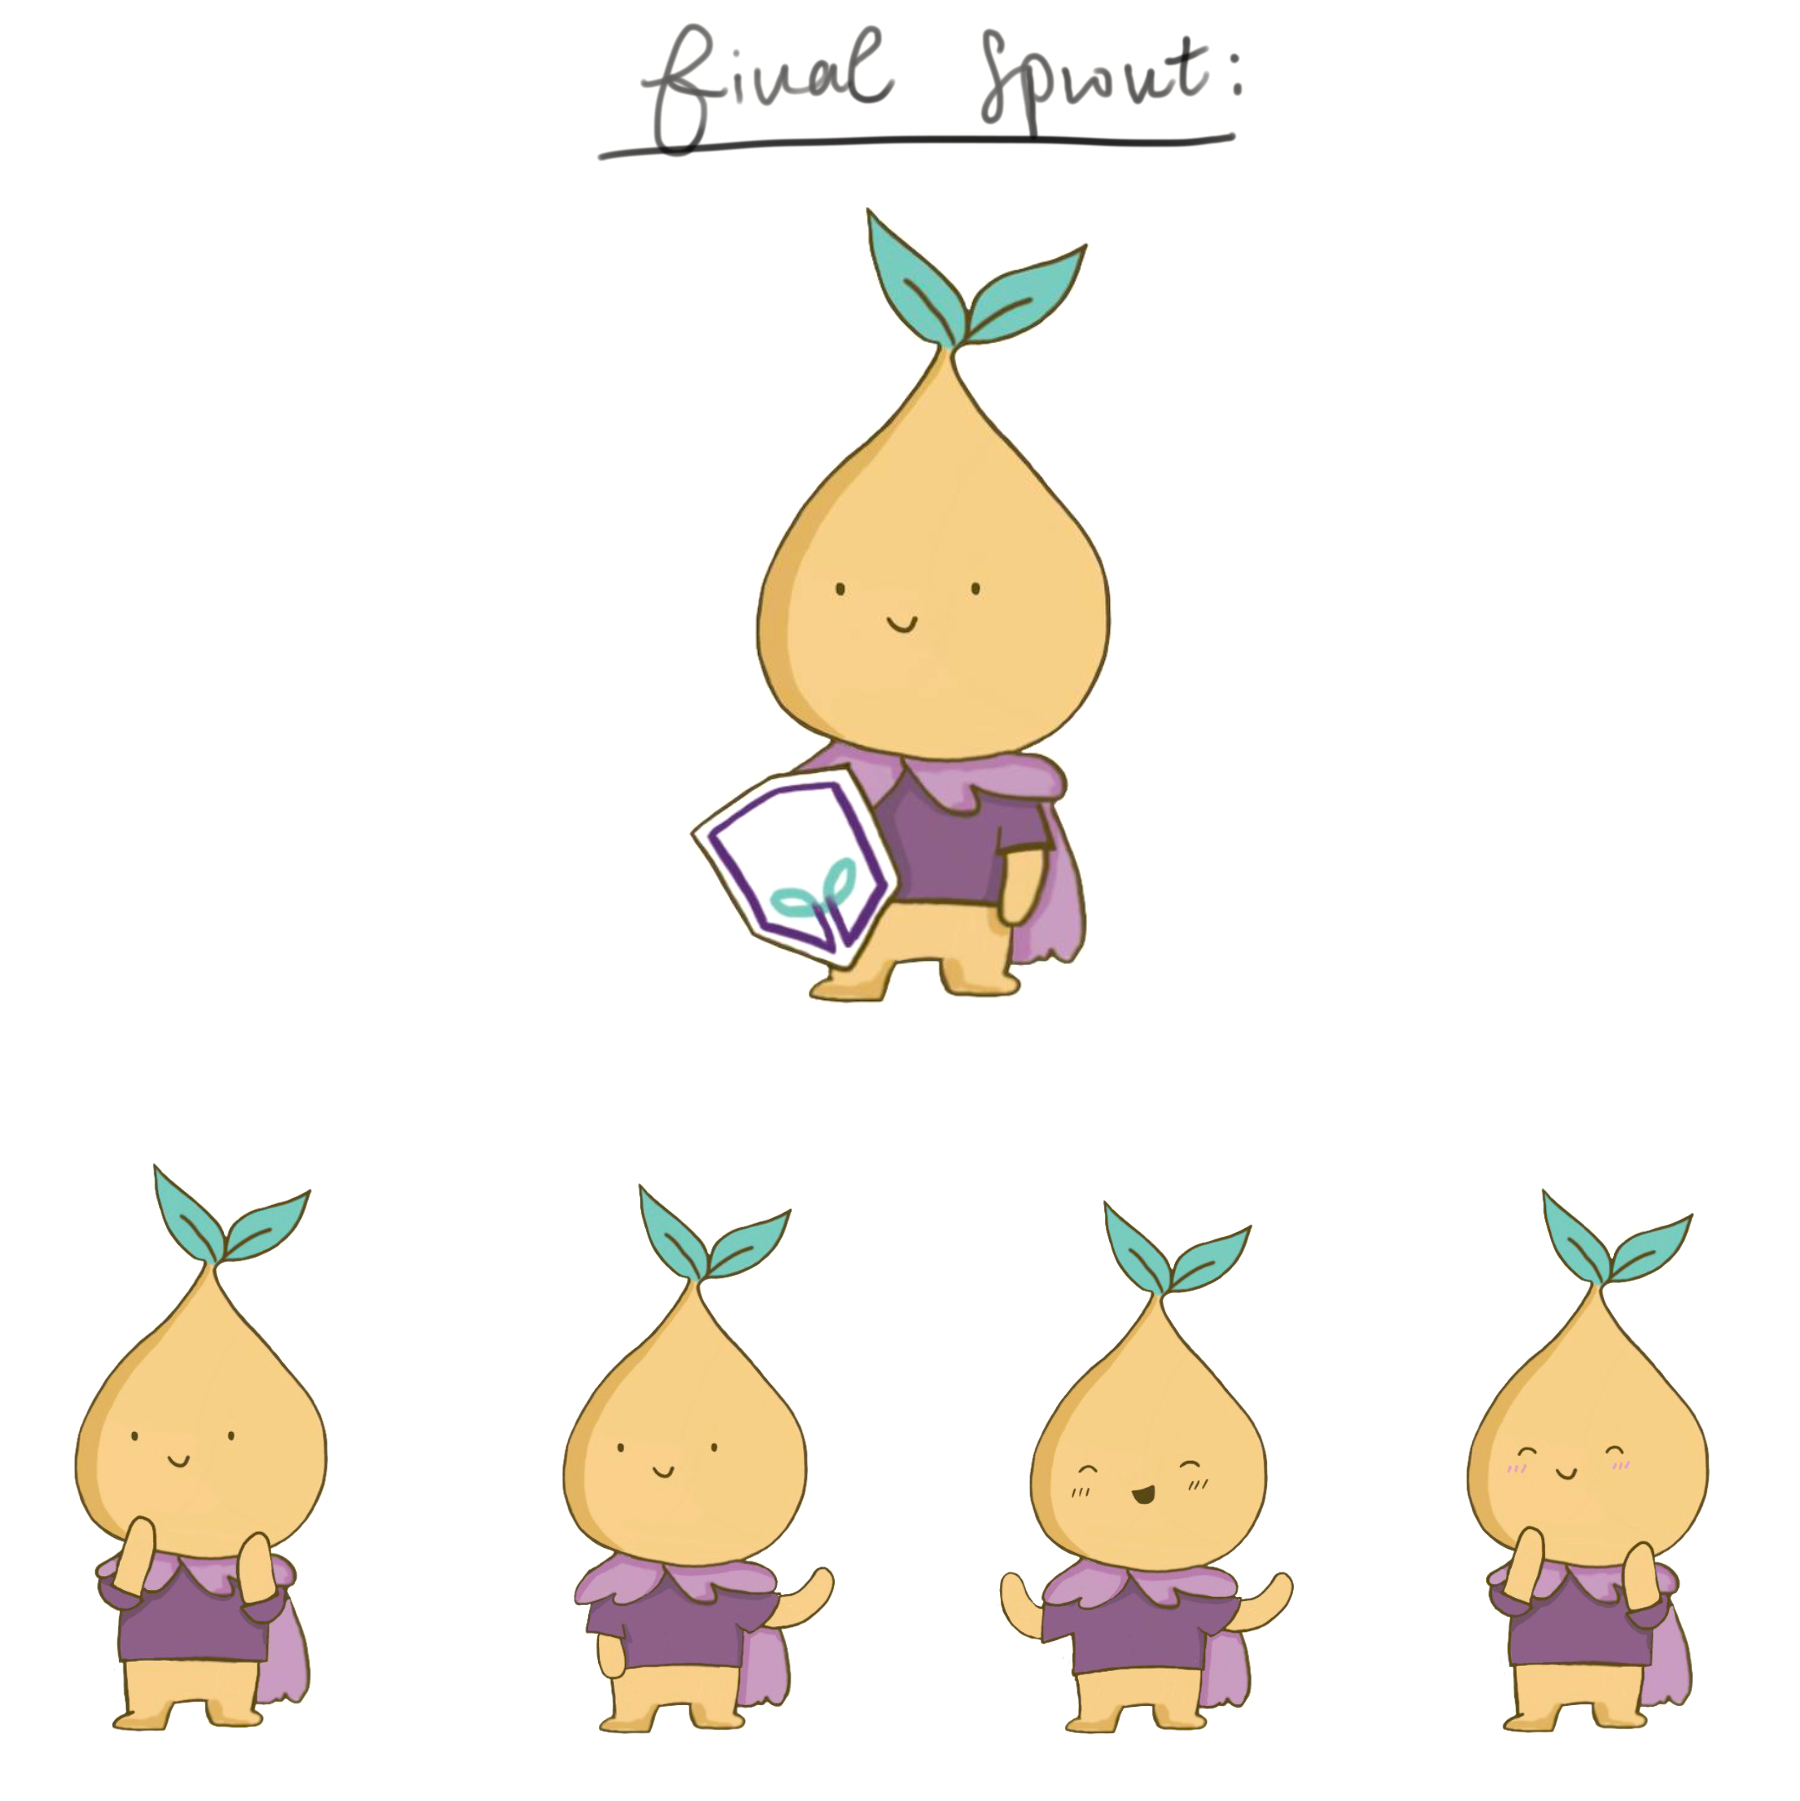 Final Sprout